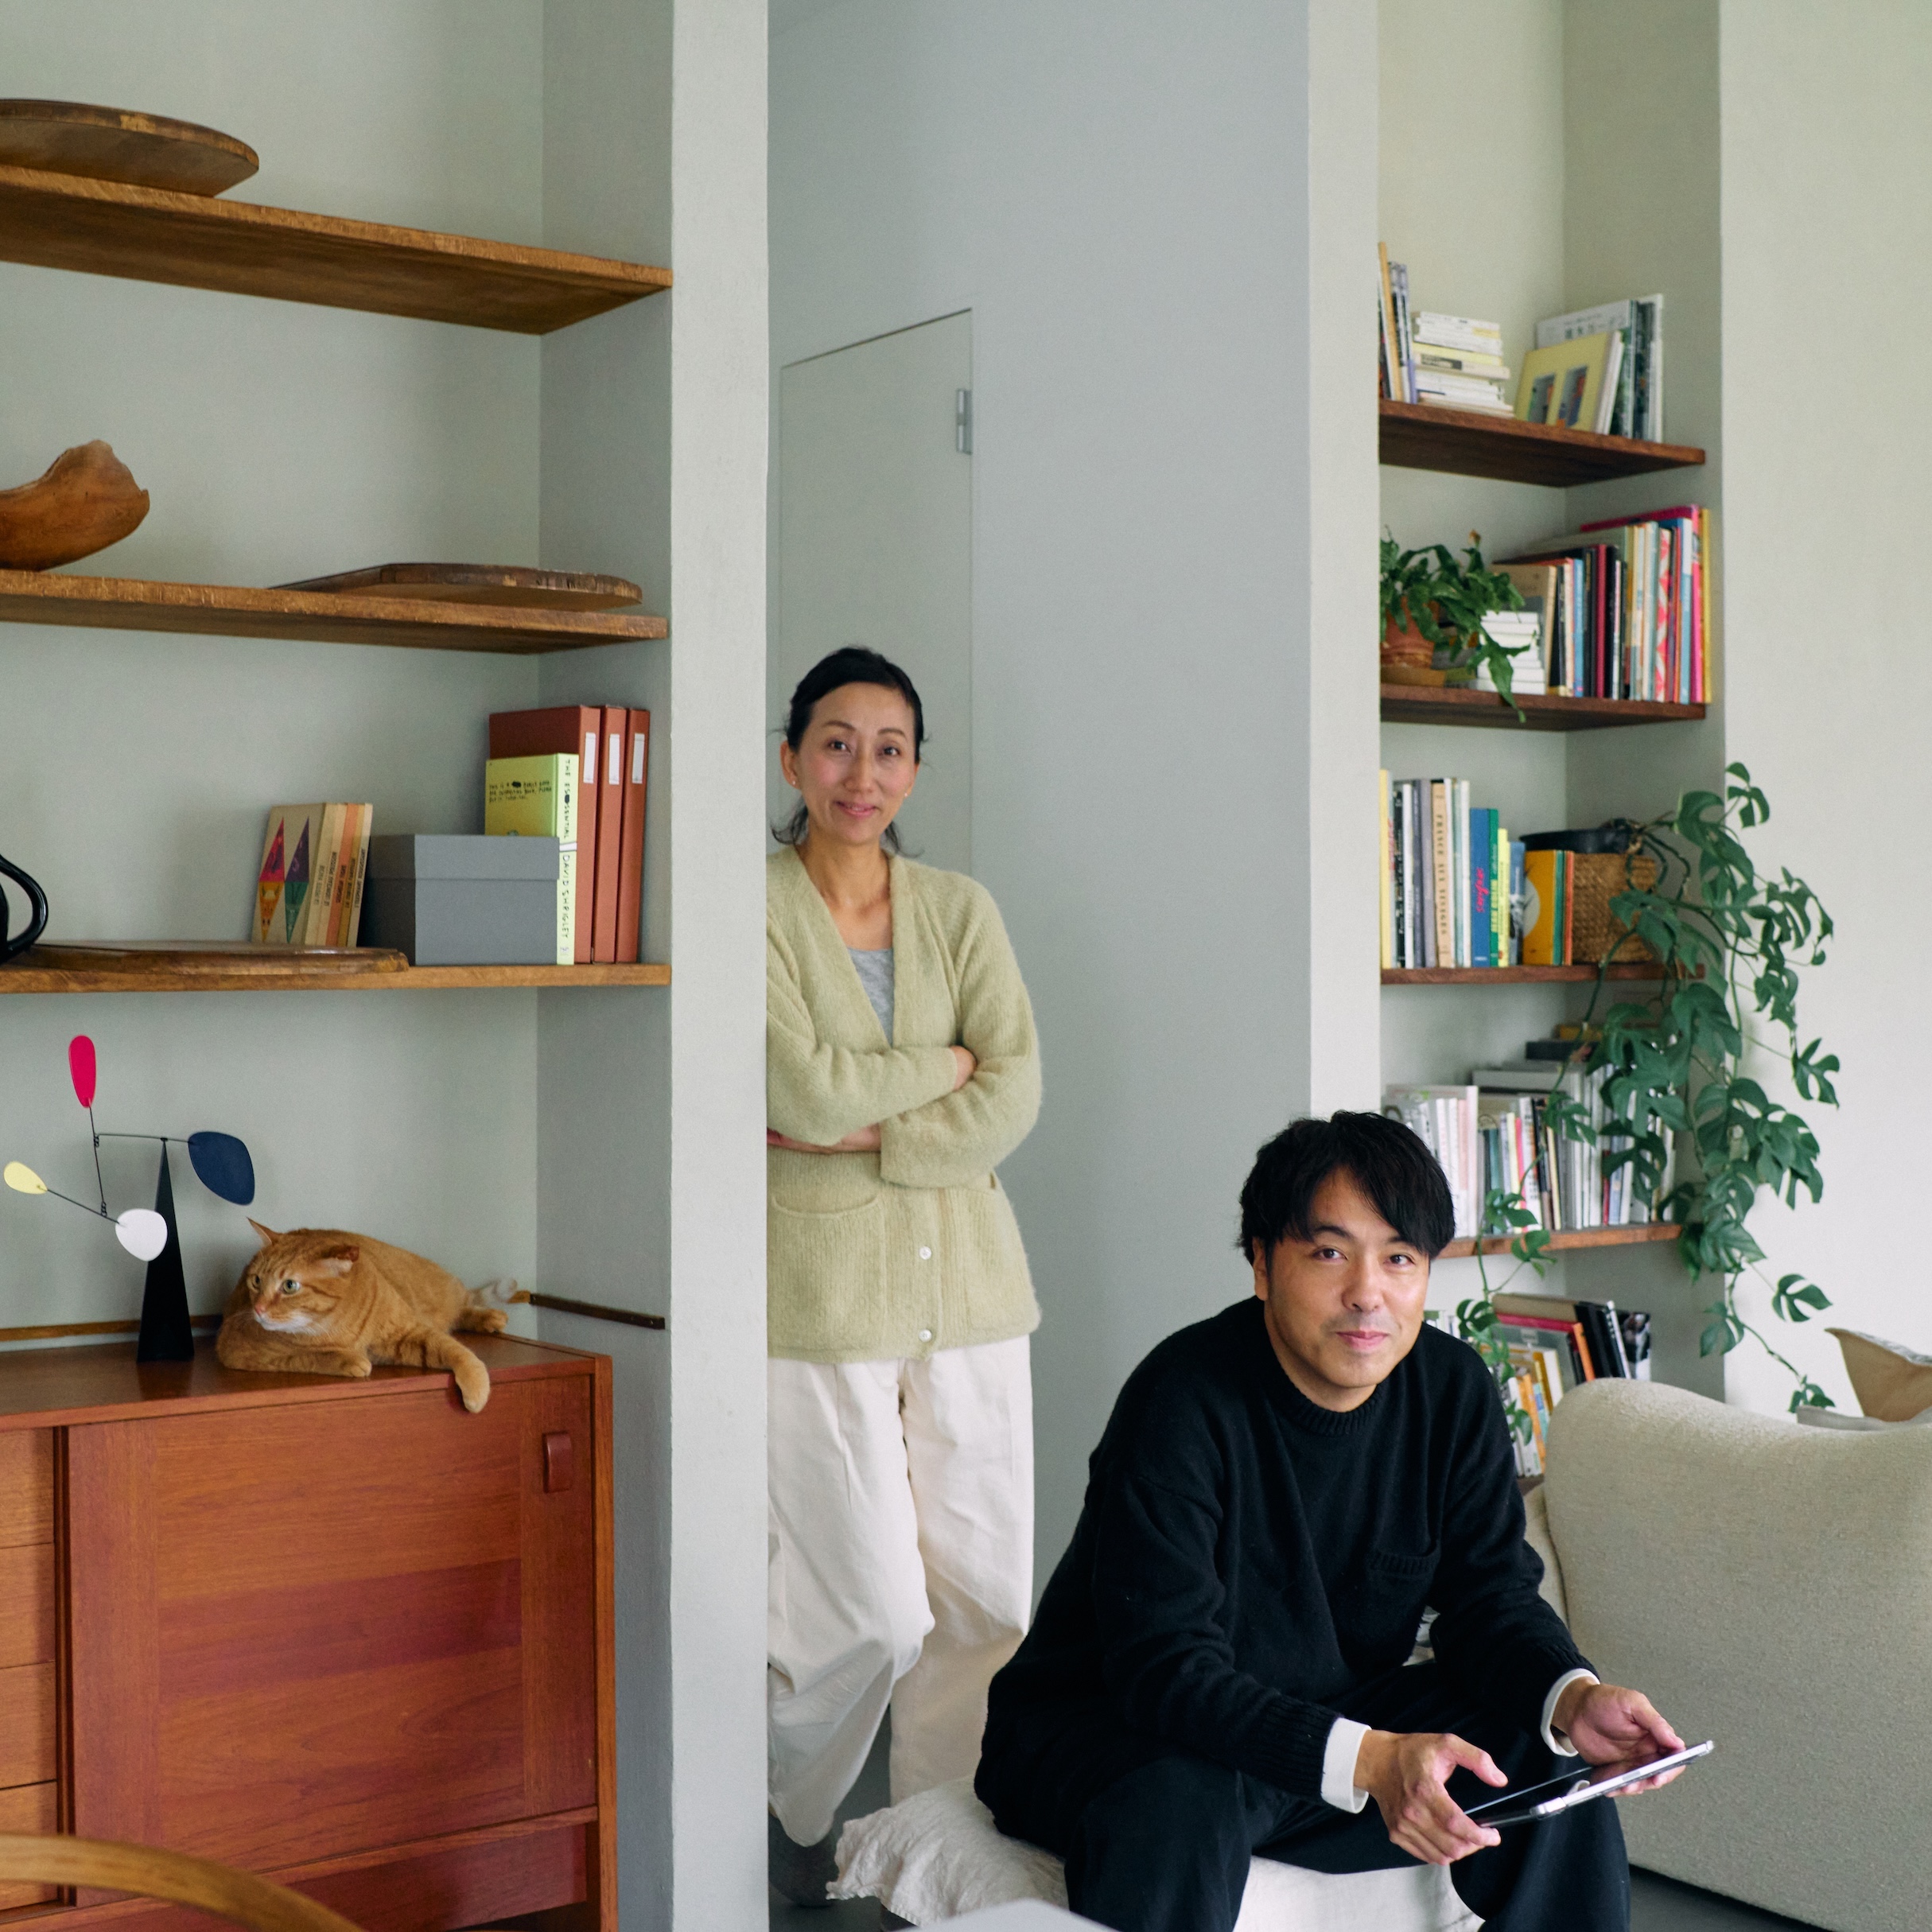 akira tani and kim hyunsook at home in the house they designed in tokyo. 125